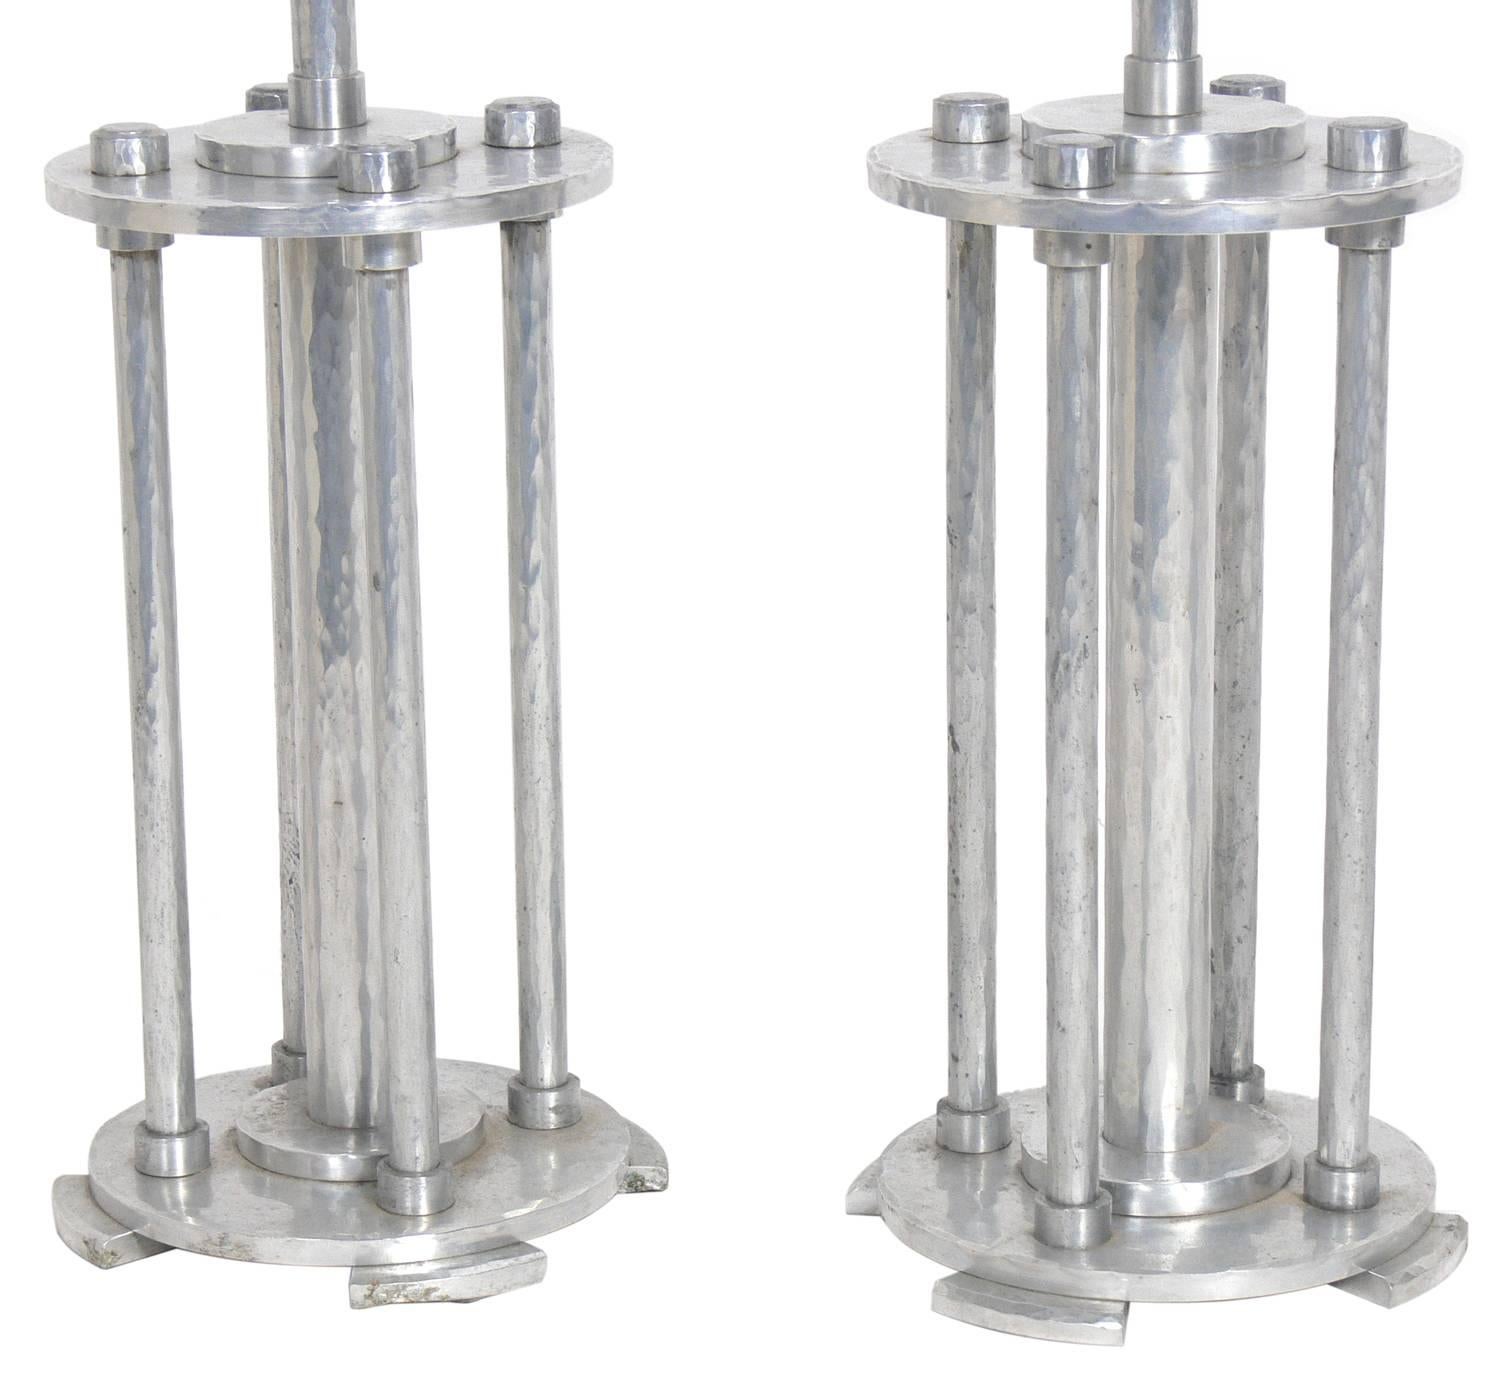 Pair of Art Deco hammered aluminium lamps attributed to Palmer Smith, unsigned, American, circa 1930s. They retain their warm original patina. They have been rewired and are ready to use. The price noted below includes the shades. updated
